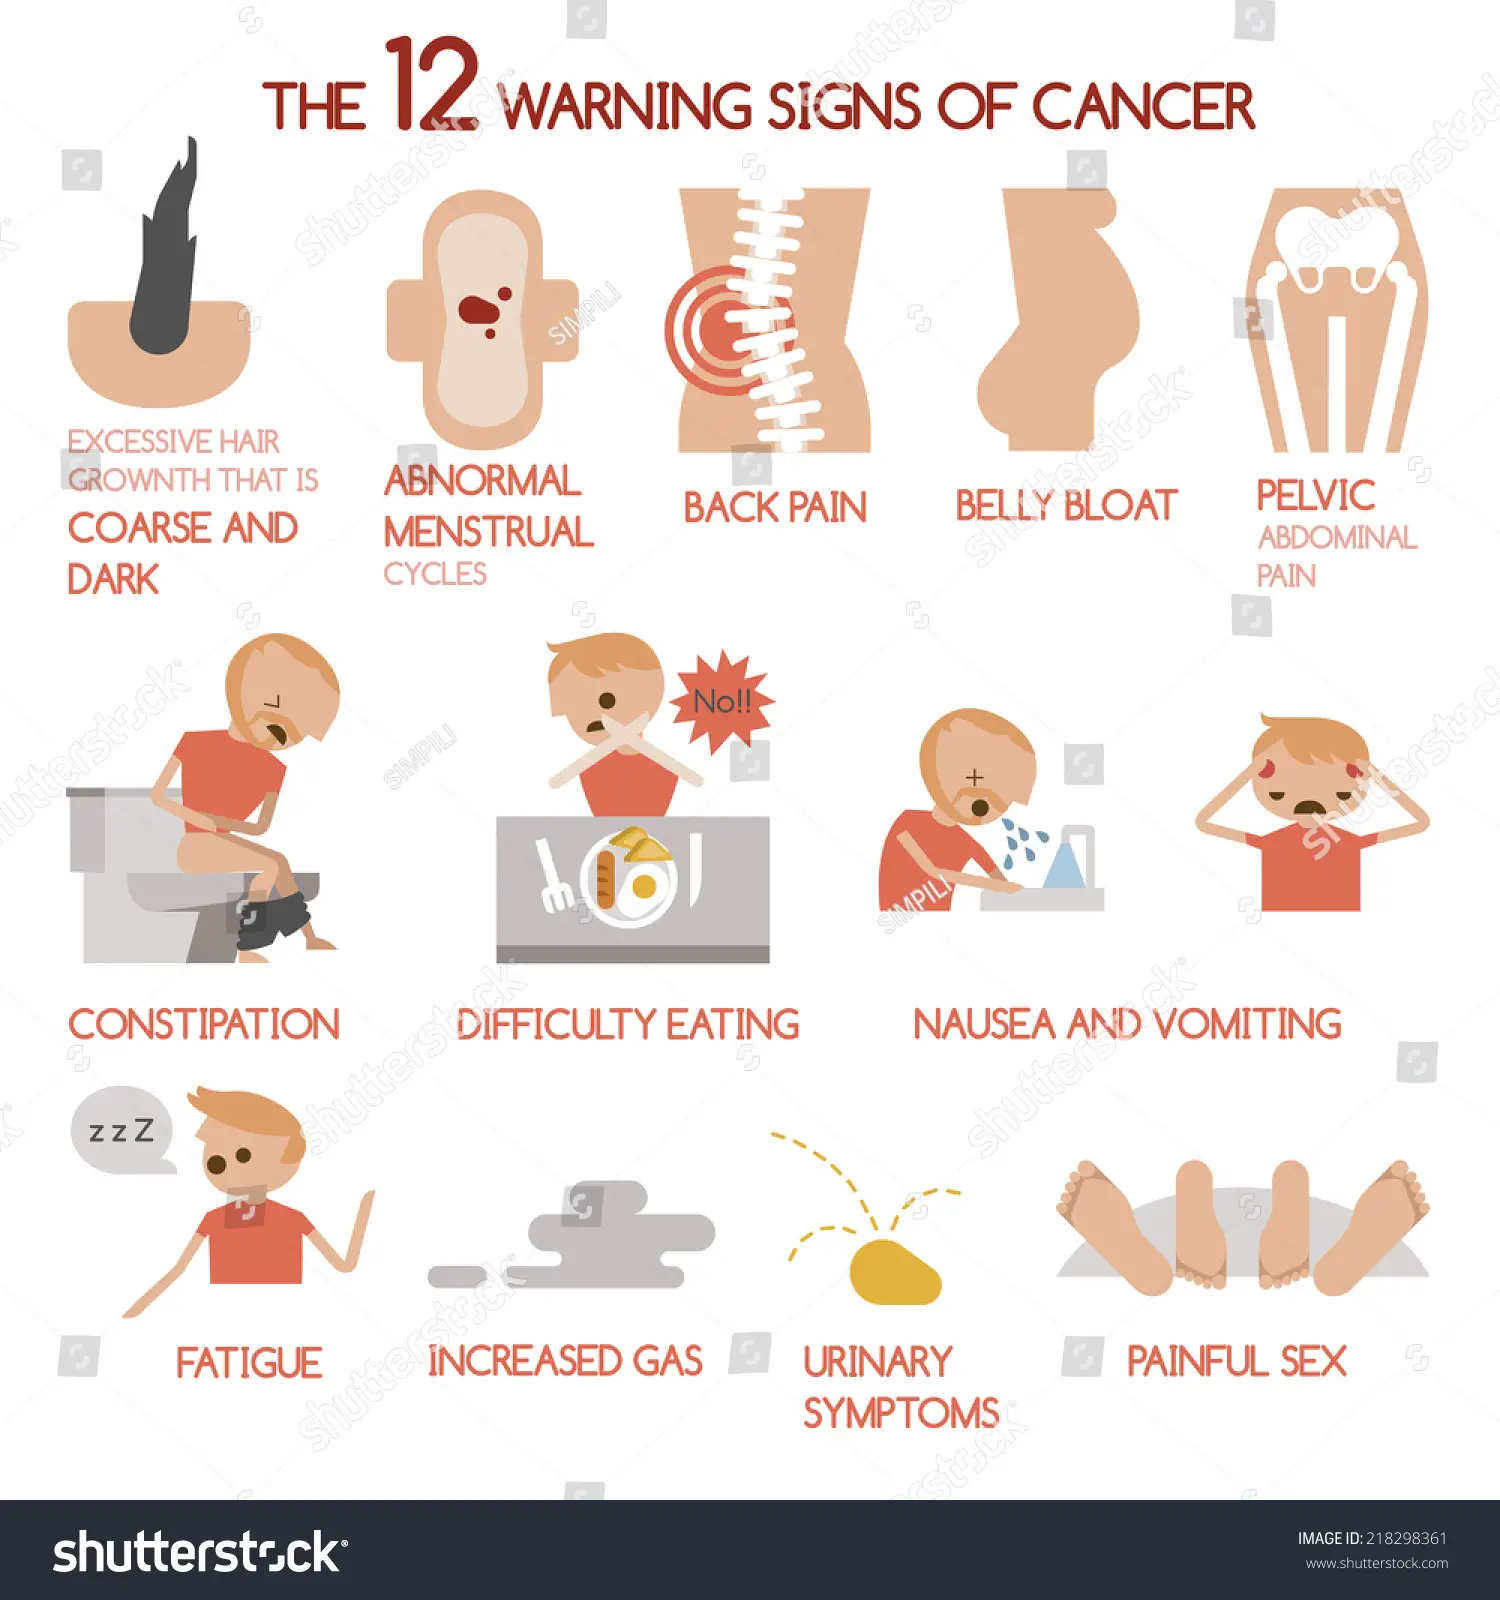 12 Warning Signs Cancer Stock Vector 218298361